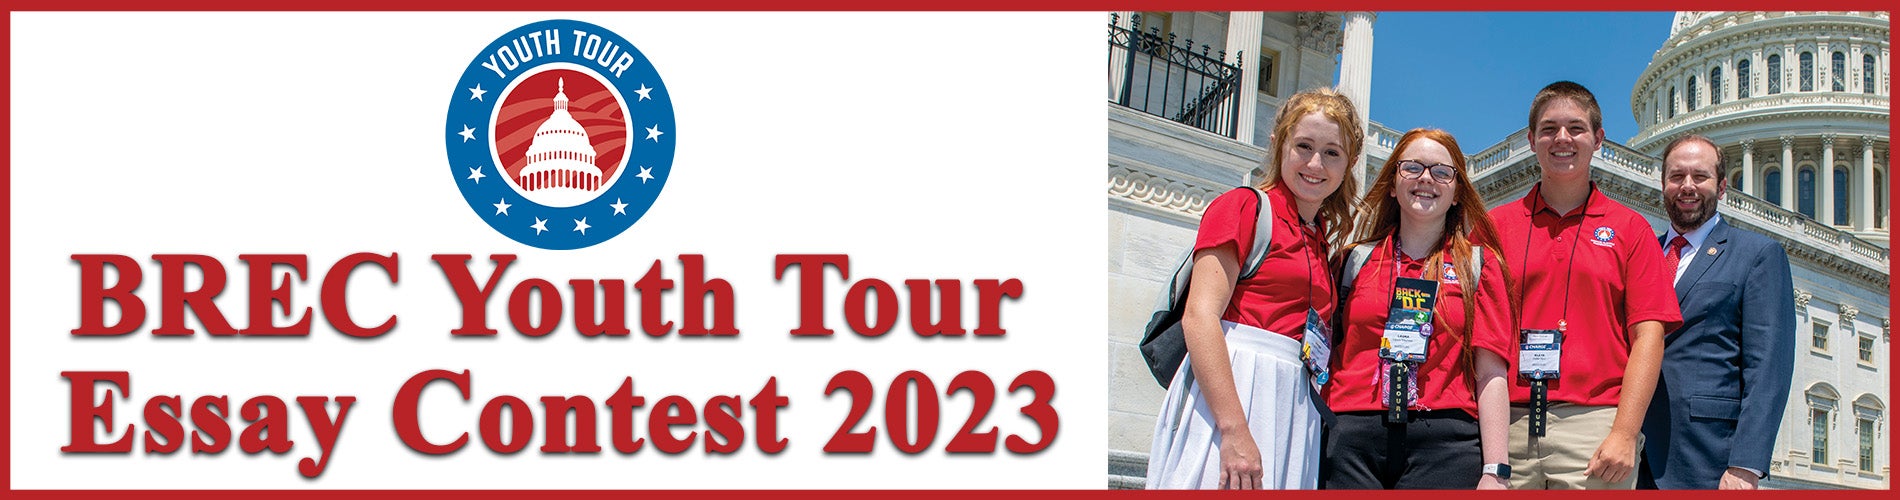 youth tour 